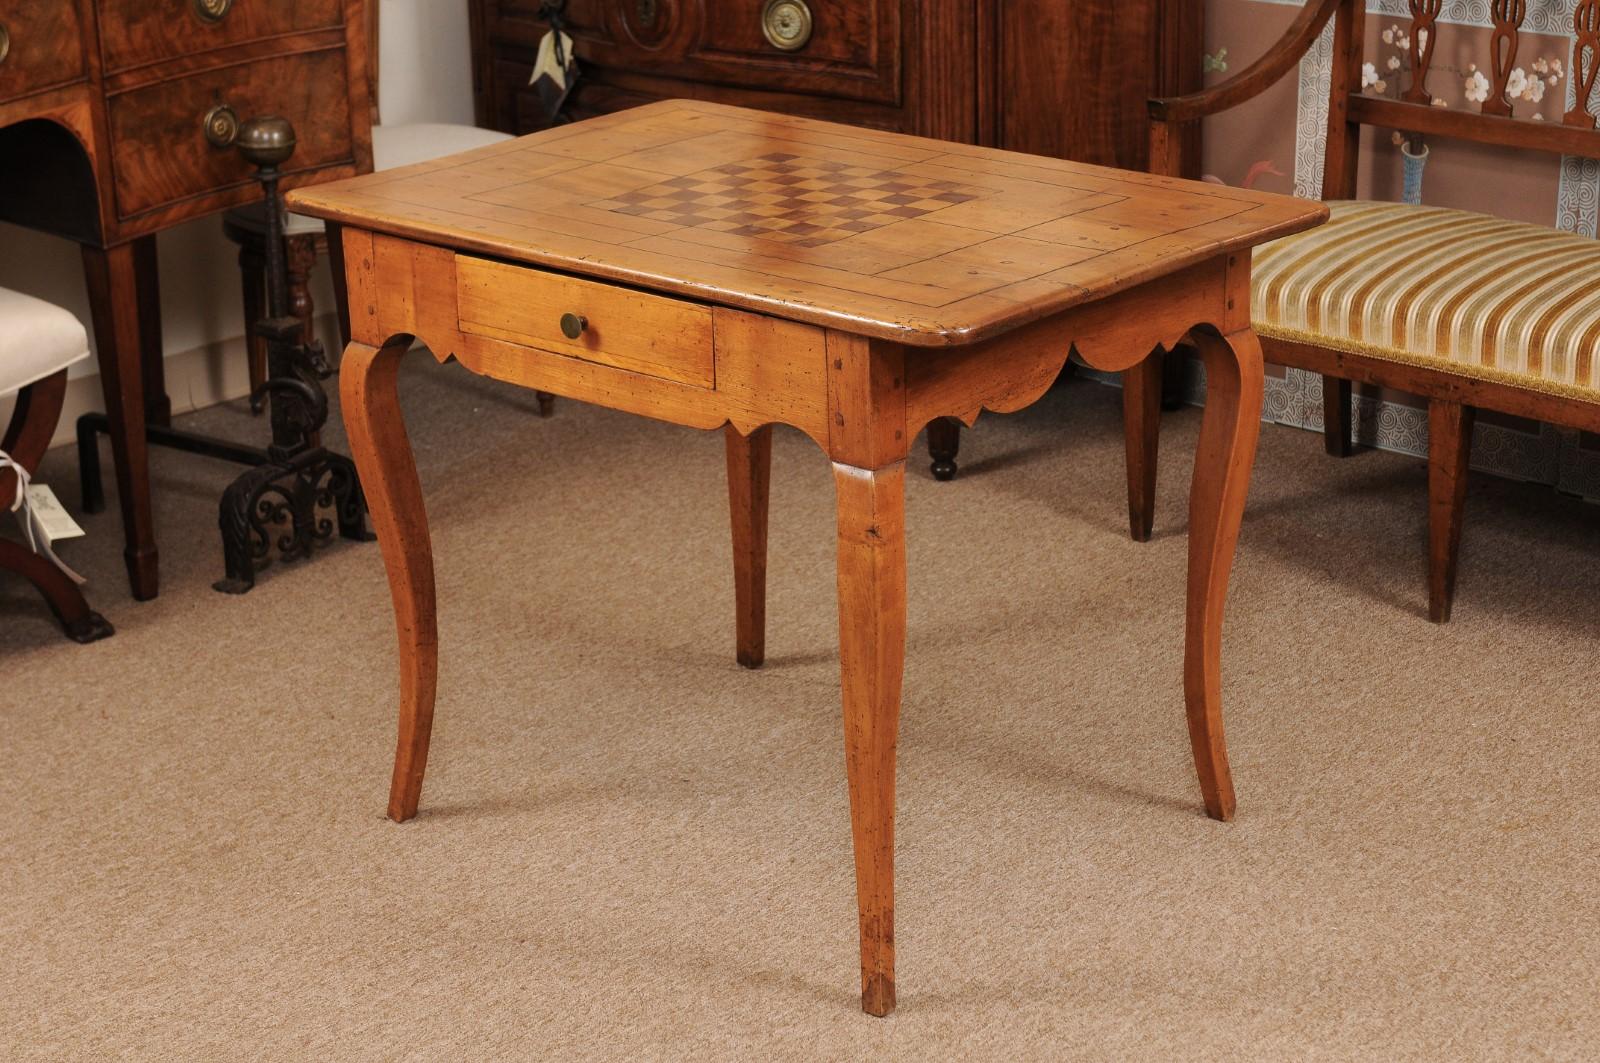 French Louis XV Fruitwood Parquetry Inlaid Table, Mid-18th Century For Sale 8